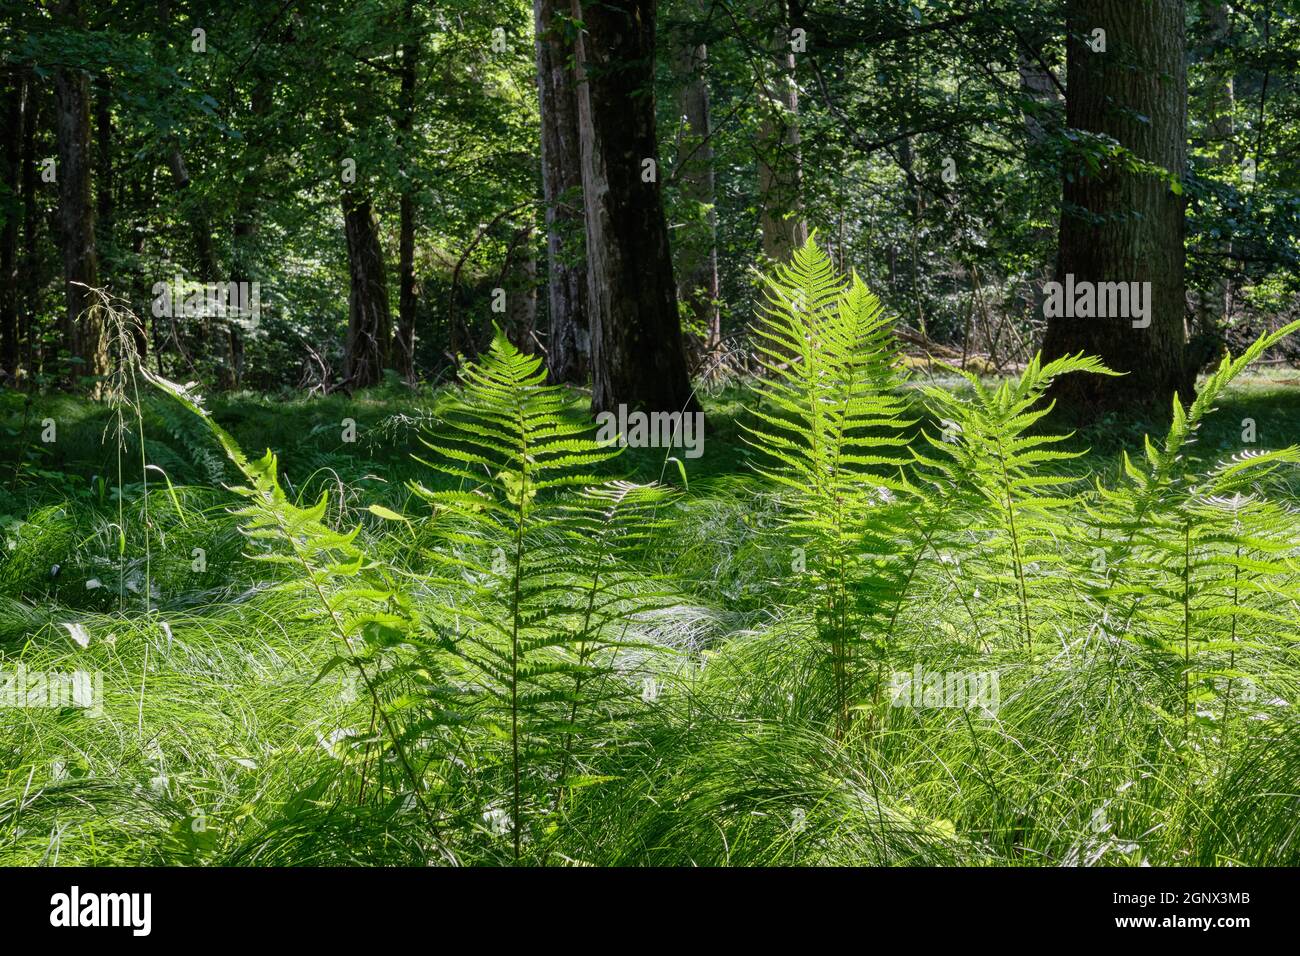 Fern in summertime sun with deciduous forest in background, Bialowieza Forest, Poland, Europe Stock Photo